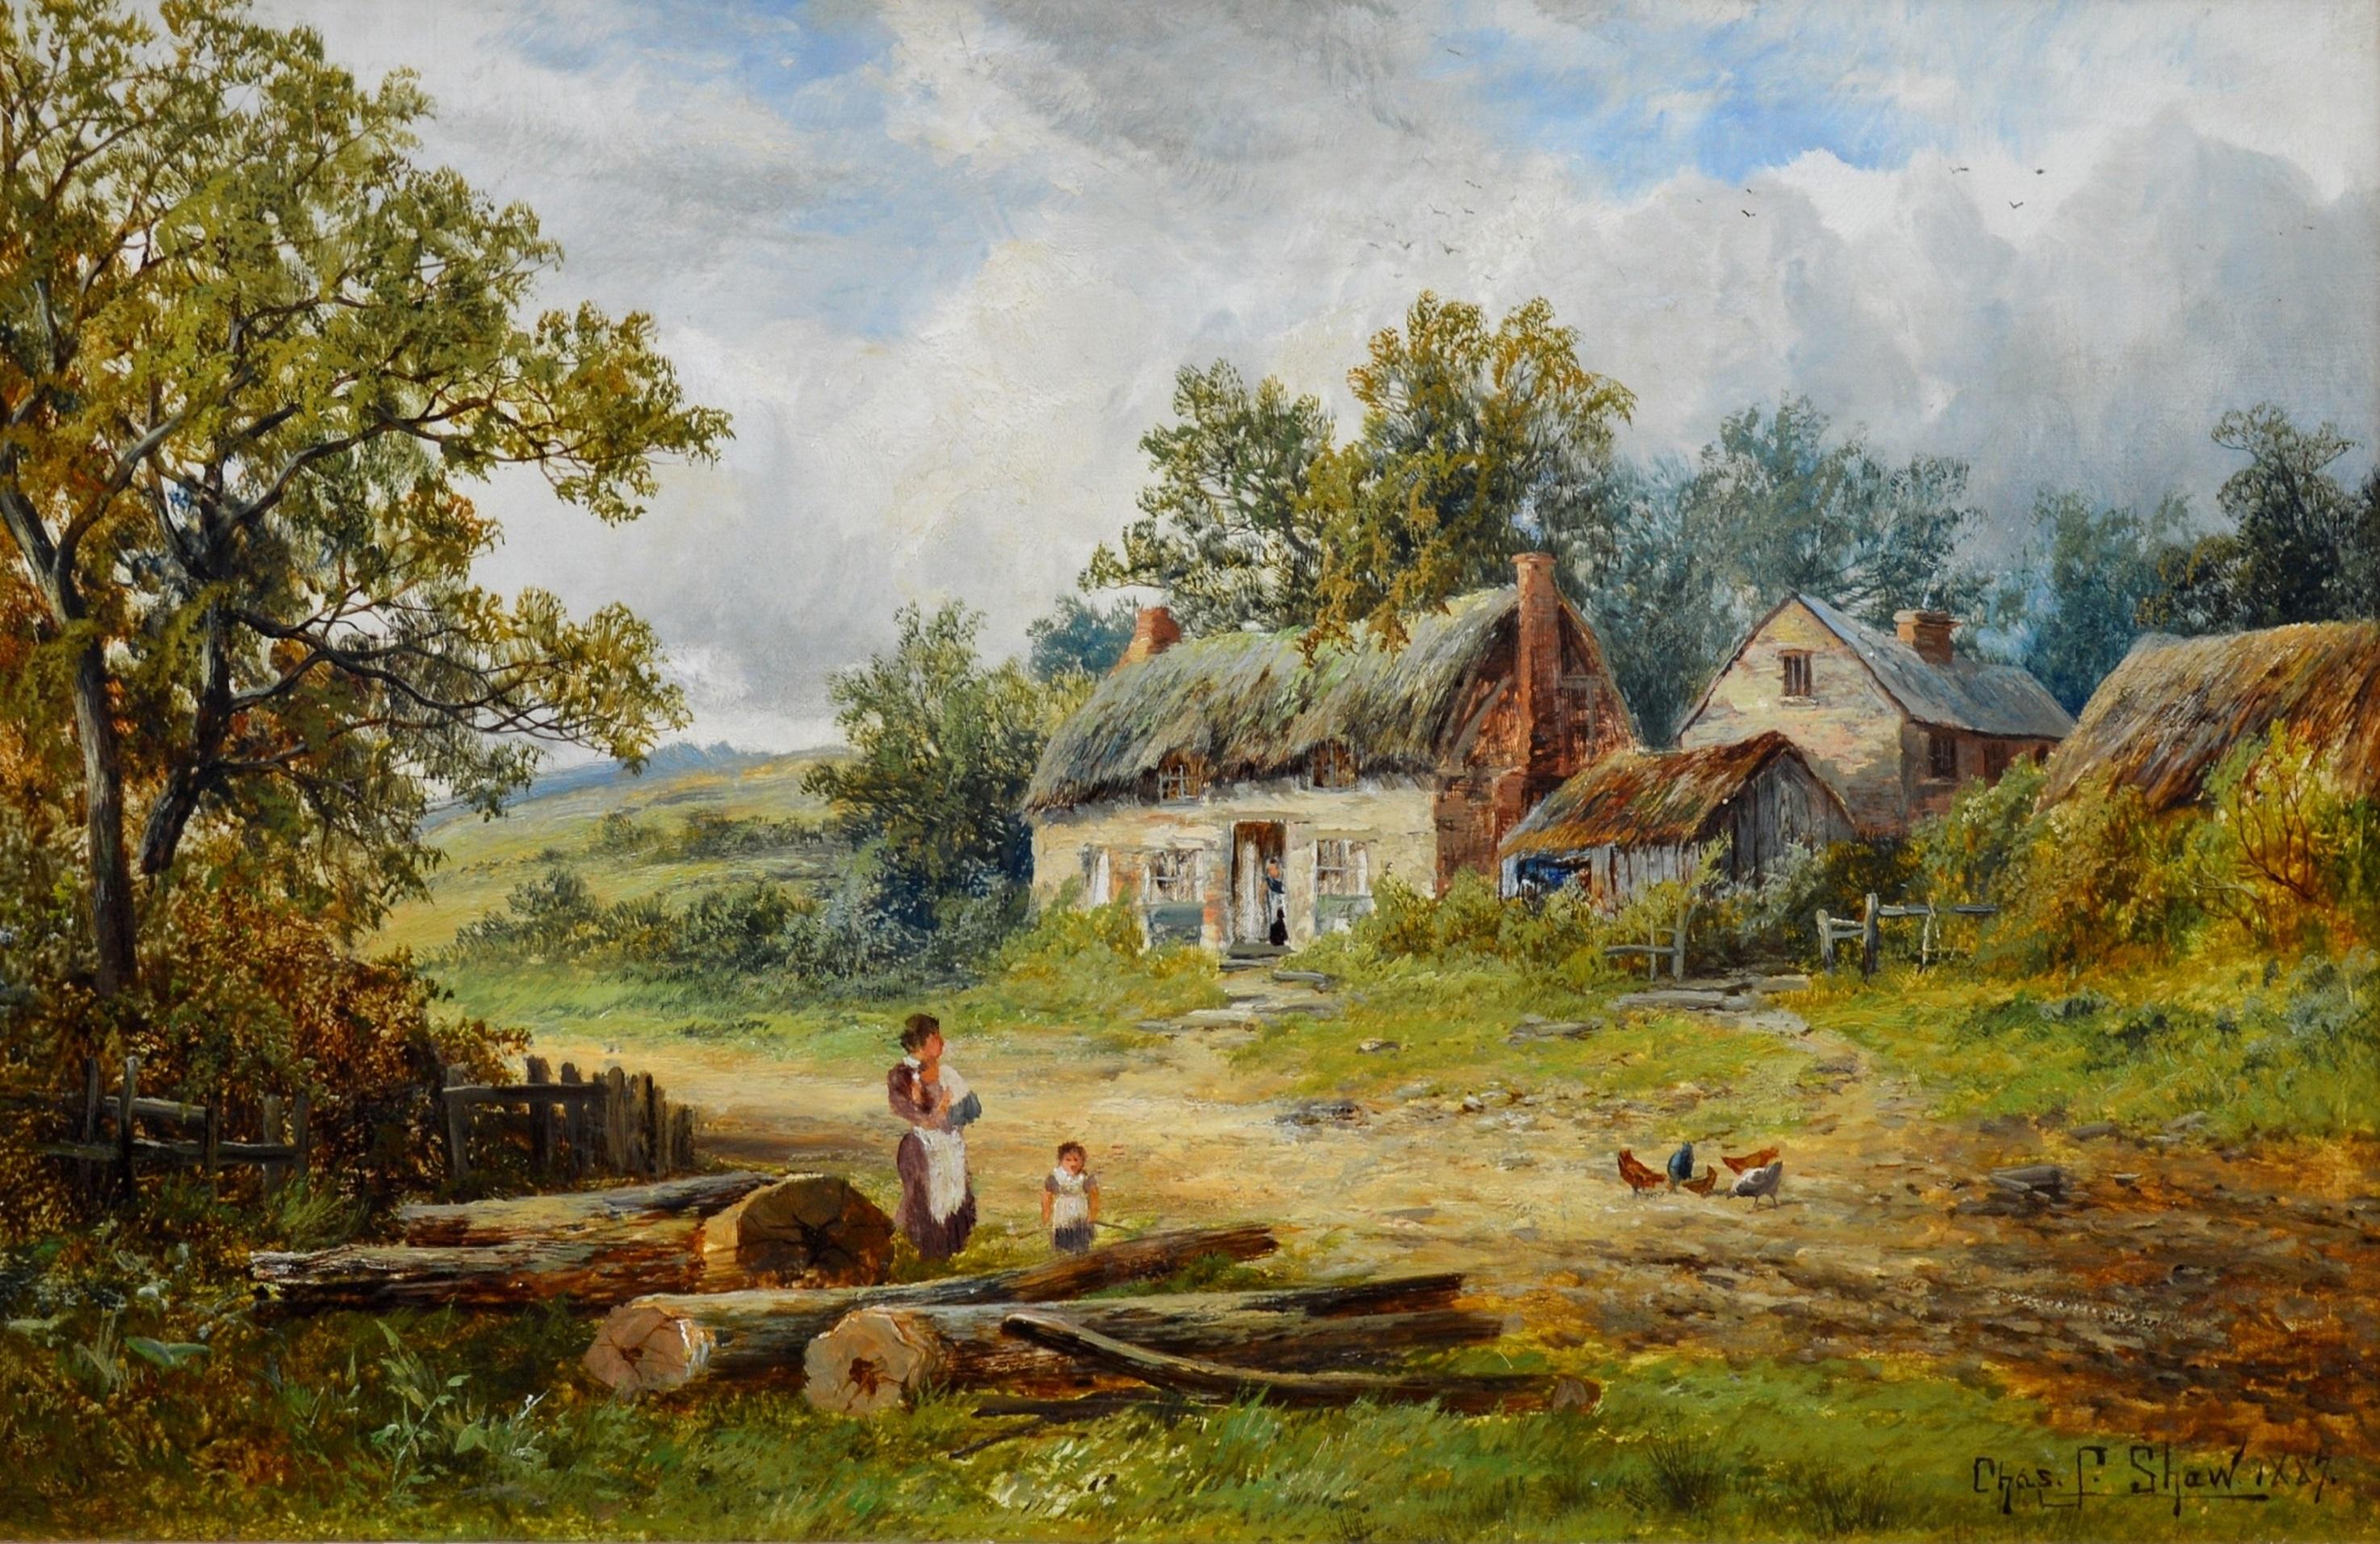 This is a large 19th century landscape oil painting depicting a young mother and child outside a thatched cottage on ‘A Summer Afternoon’ by the listed British landscape painter Charles Leaver Shaw (1853-1932). The painting is signed by the artist